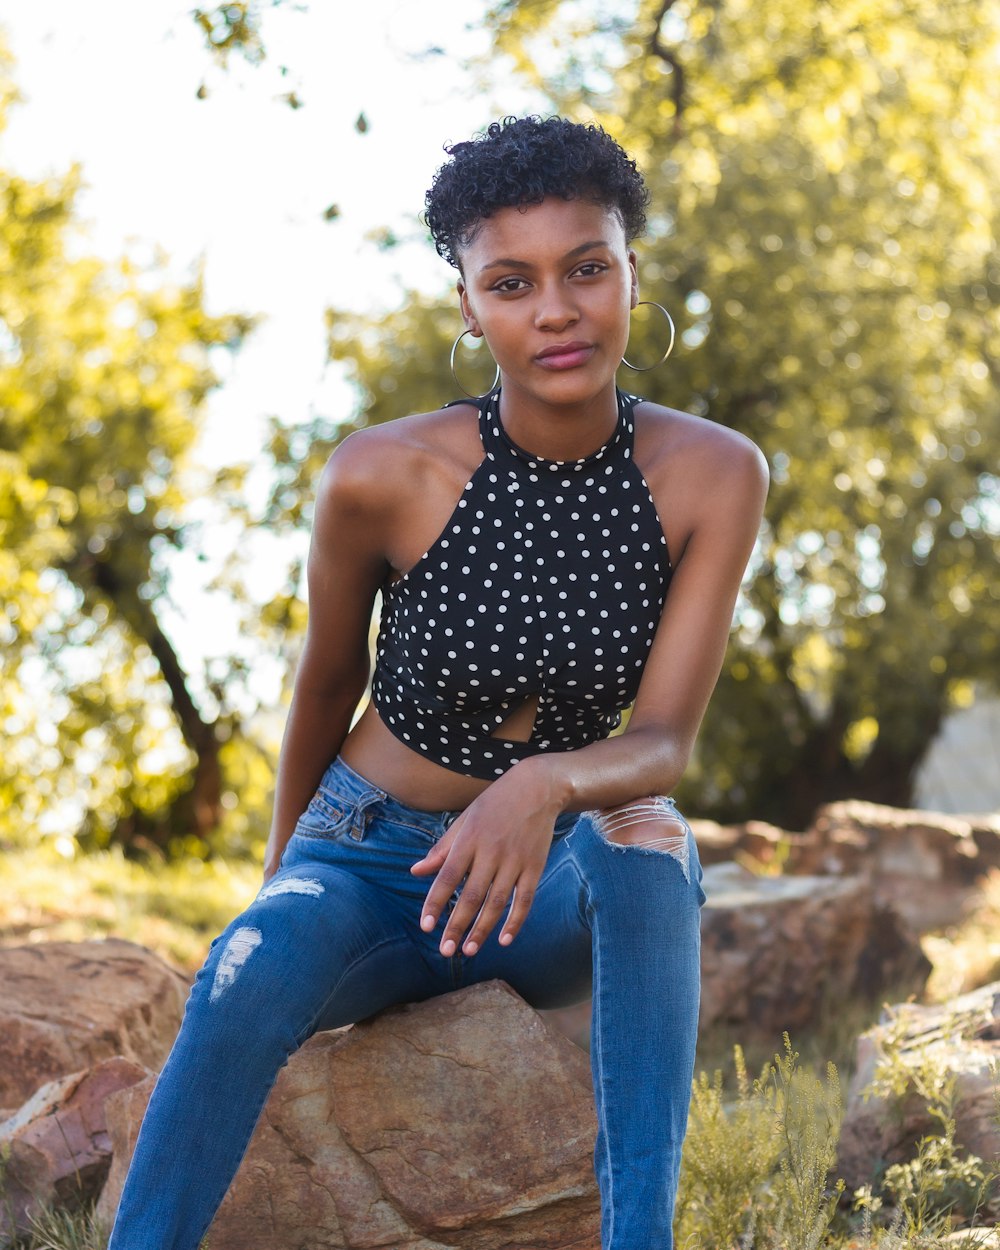 Woman in black and white polka dot tank top and blue denim jeans sitting on  brown photo – Free Johannesburg Image on Unsplash